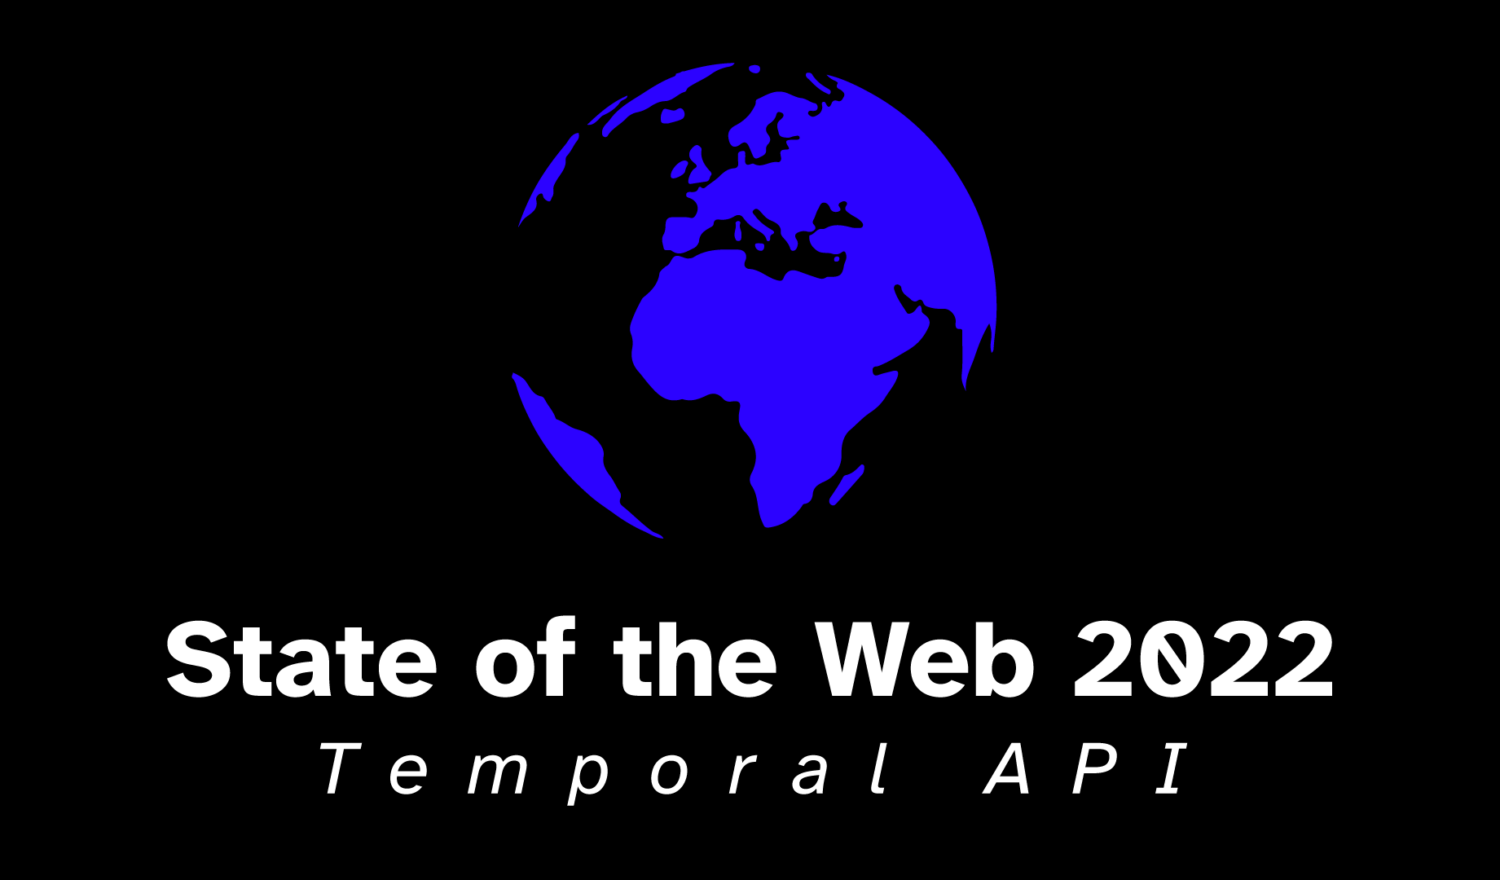 A blue globe on black background with the title temporal api